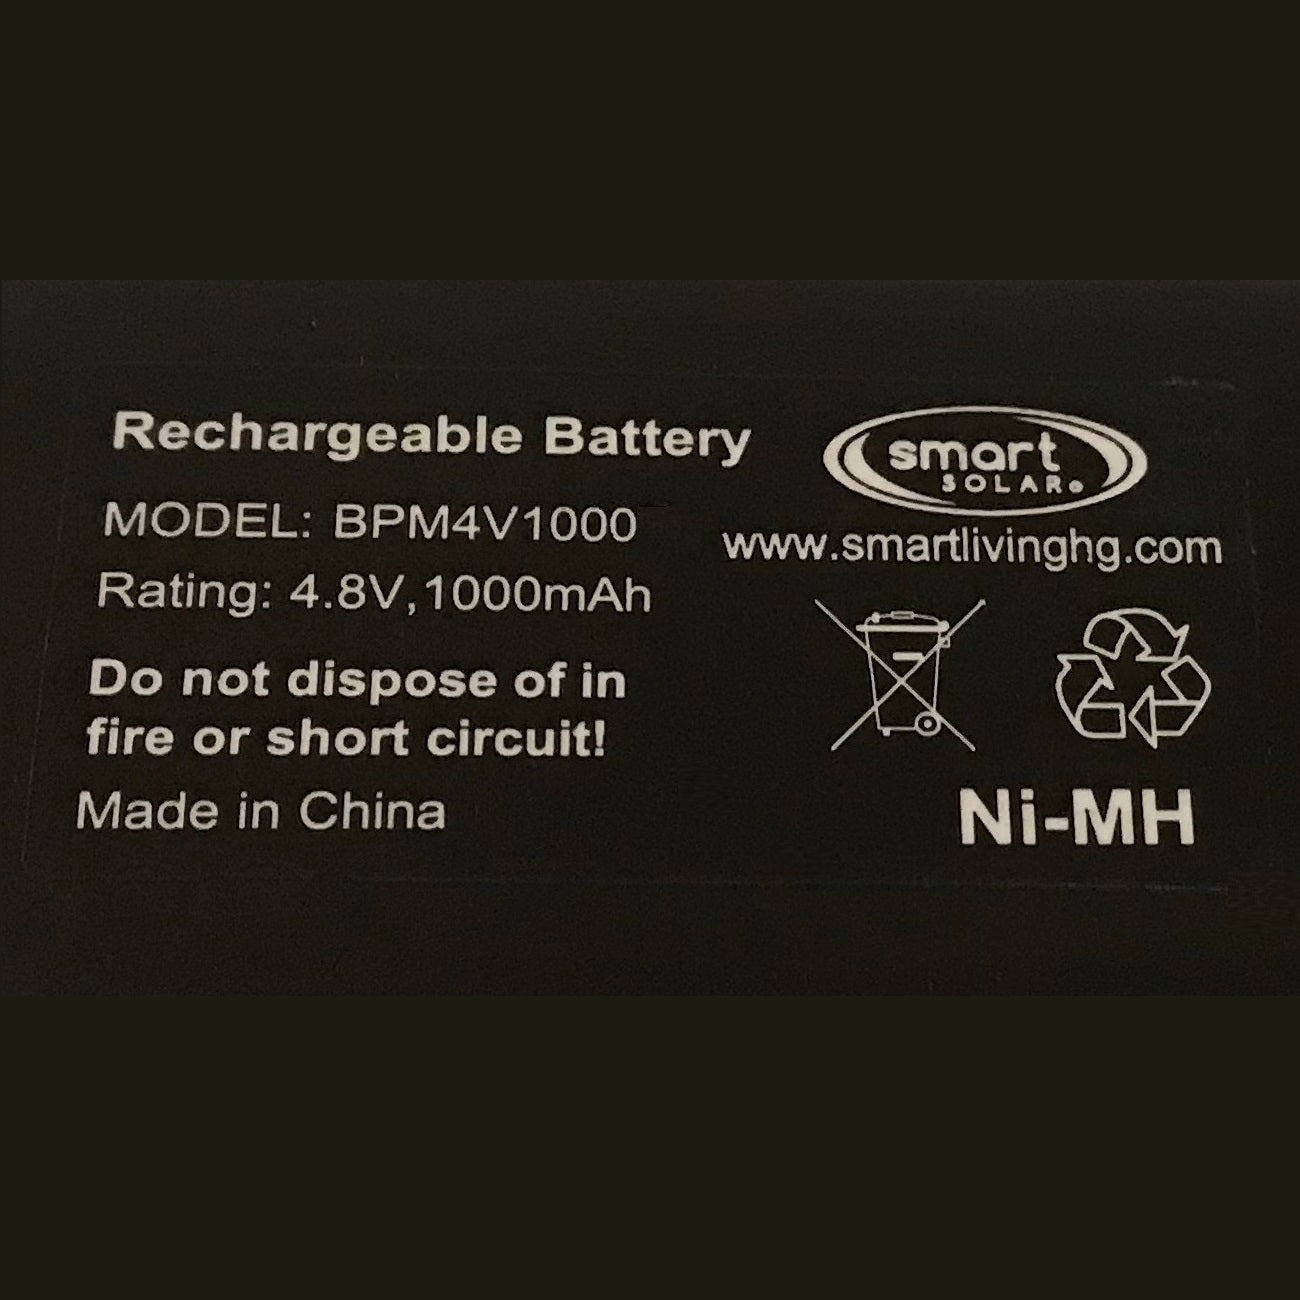 BPM4V1000 Battery Pack 4.8V 1000mAh Ni-MH (for Solar-On-Demand Fountains) *Discontinued, Need New Kit